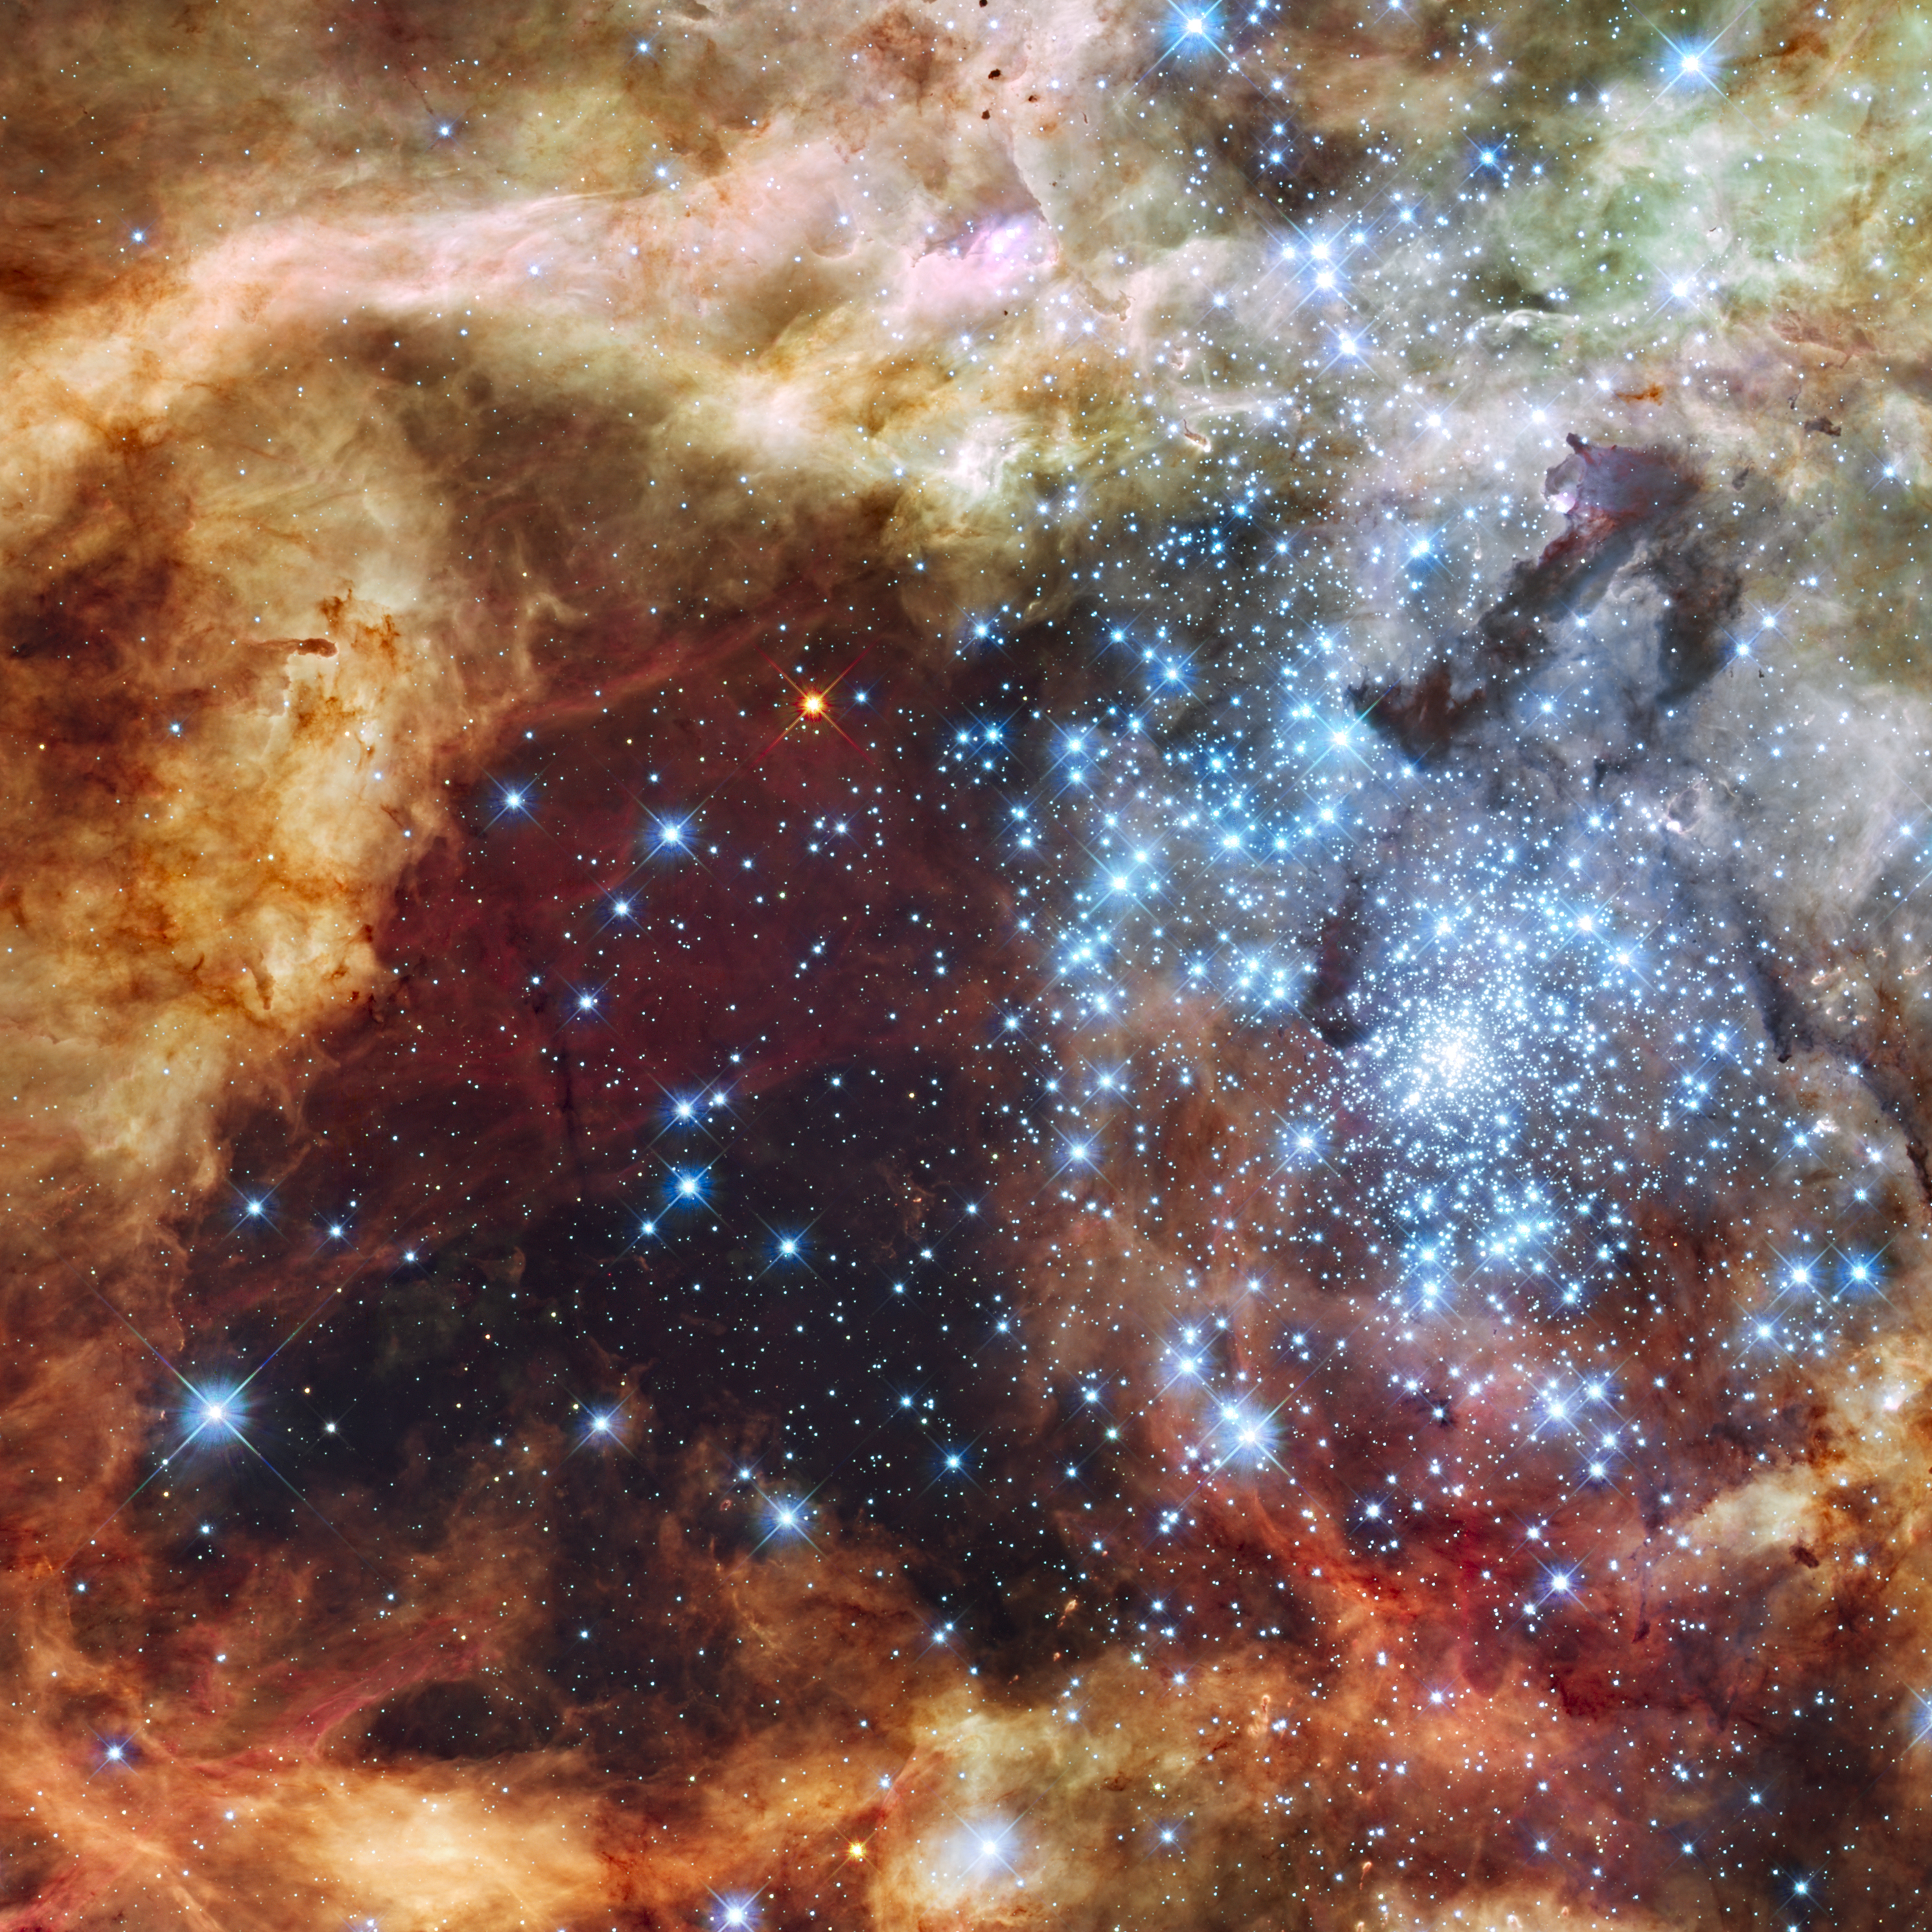 Grand star-forming region R136 in NGC 2070 (visible and ultraviolet, captured by the Hubble Space Telescope)